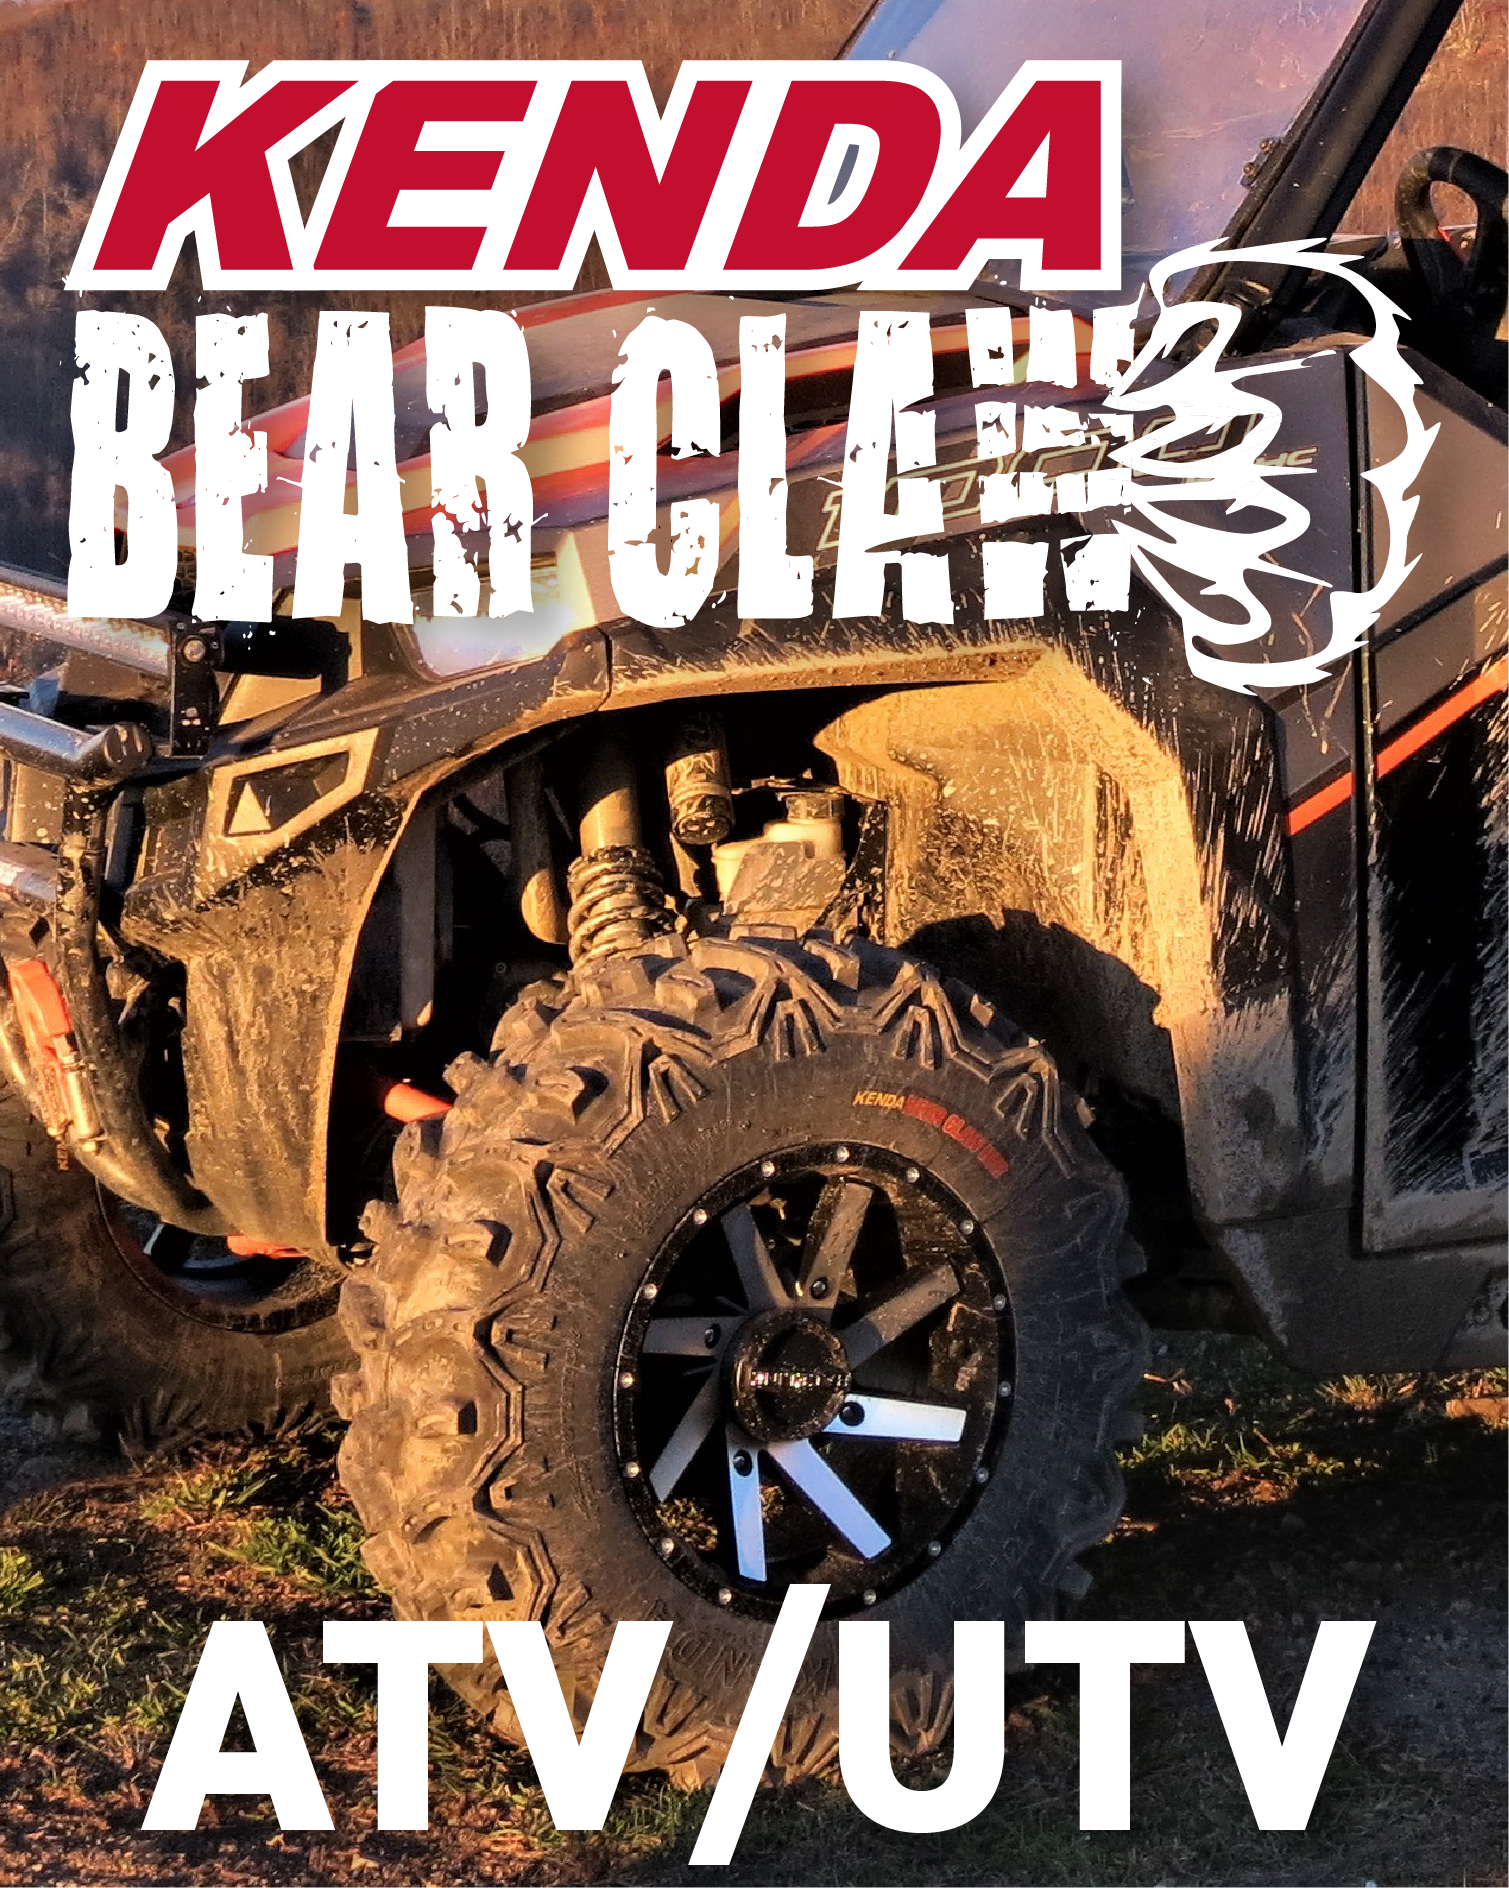 Kenda Bear Claw EX 21x7-10 Front ATV 6 PLY Tires Bearclaw 21x7x10 - 2 Pack